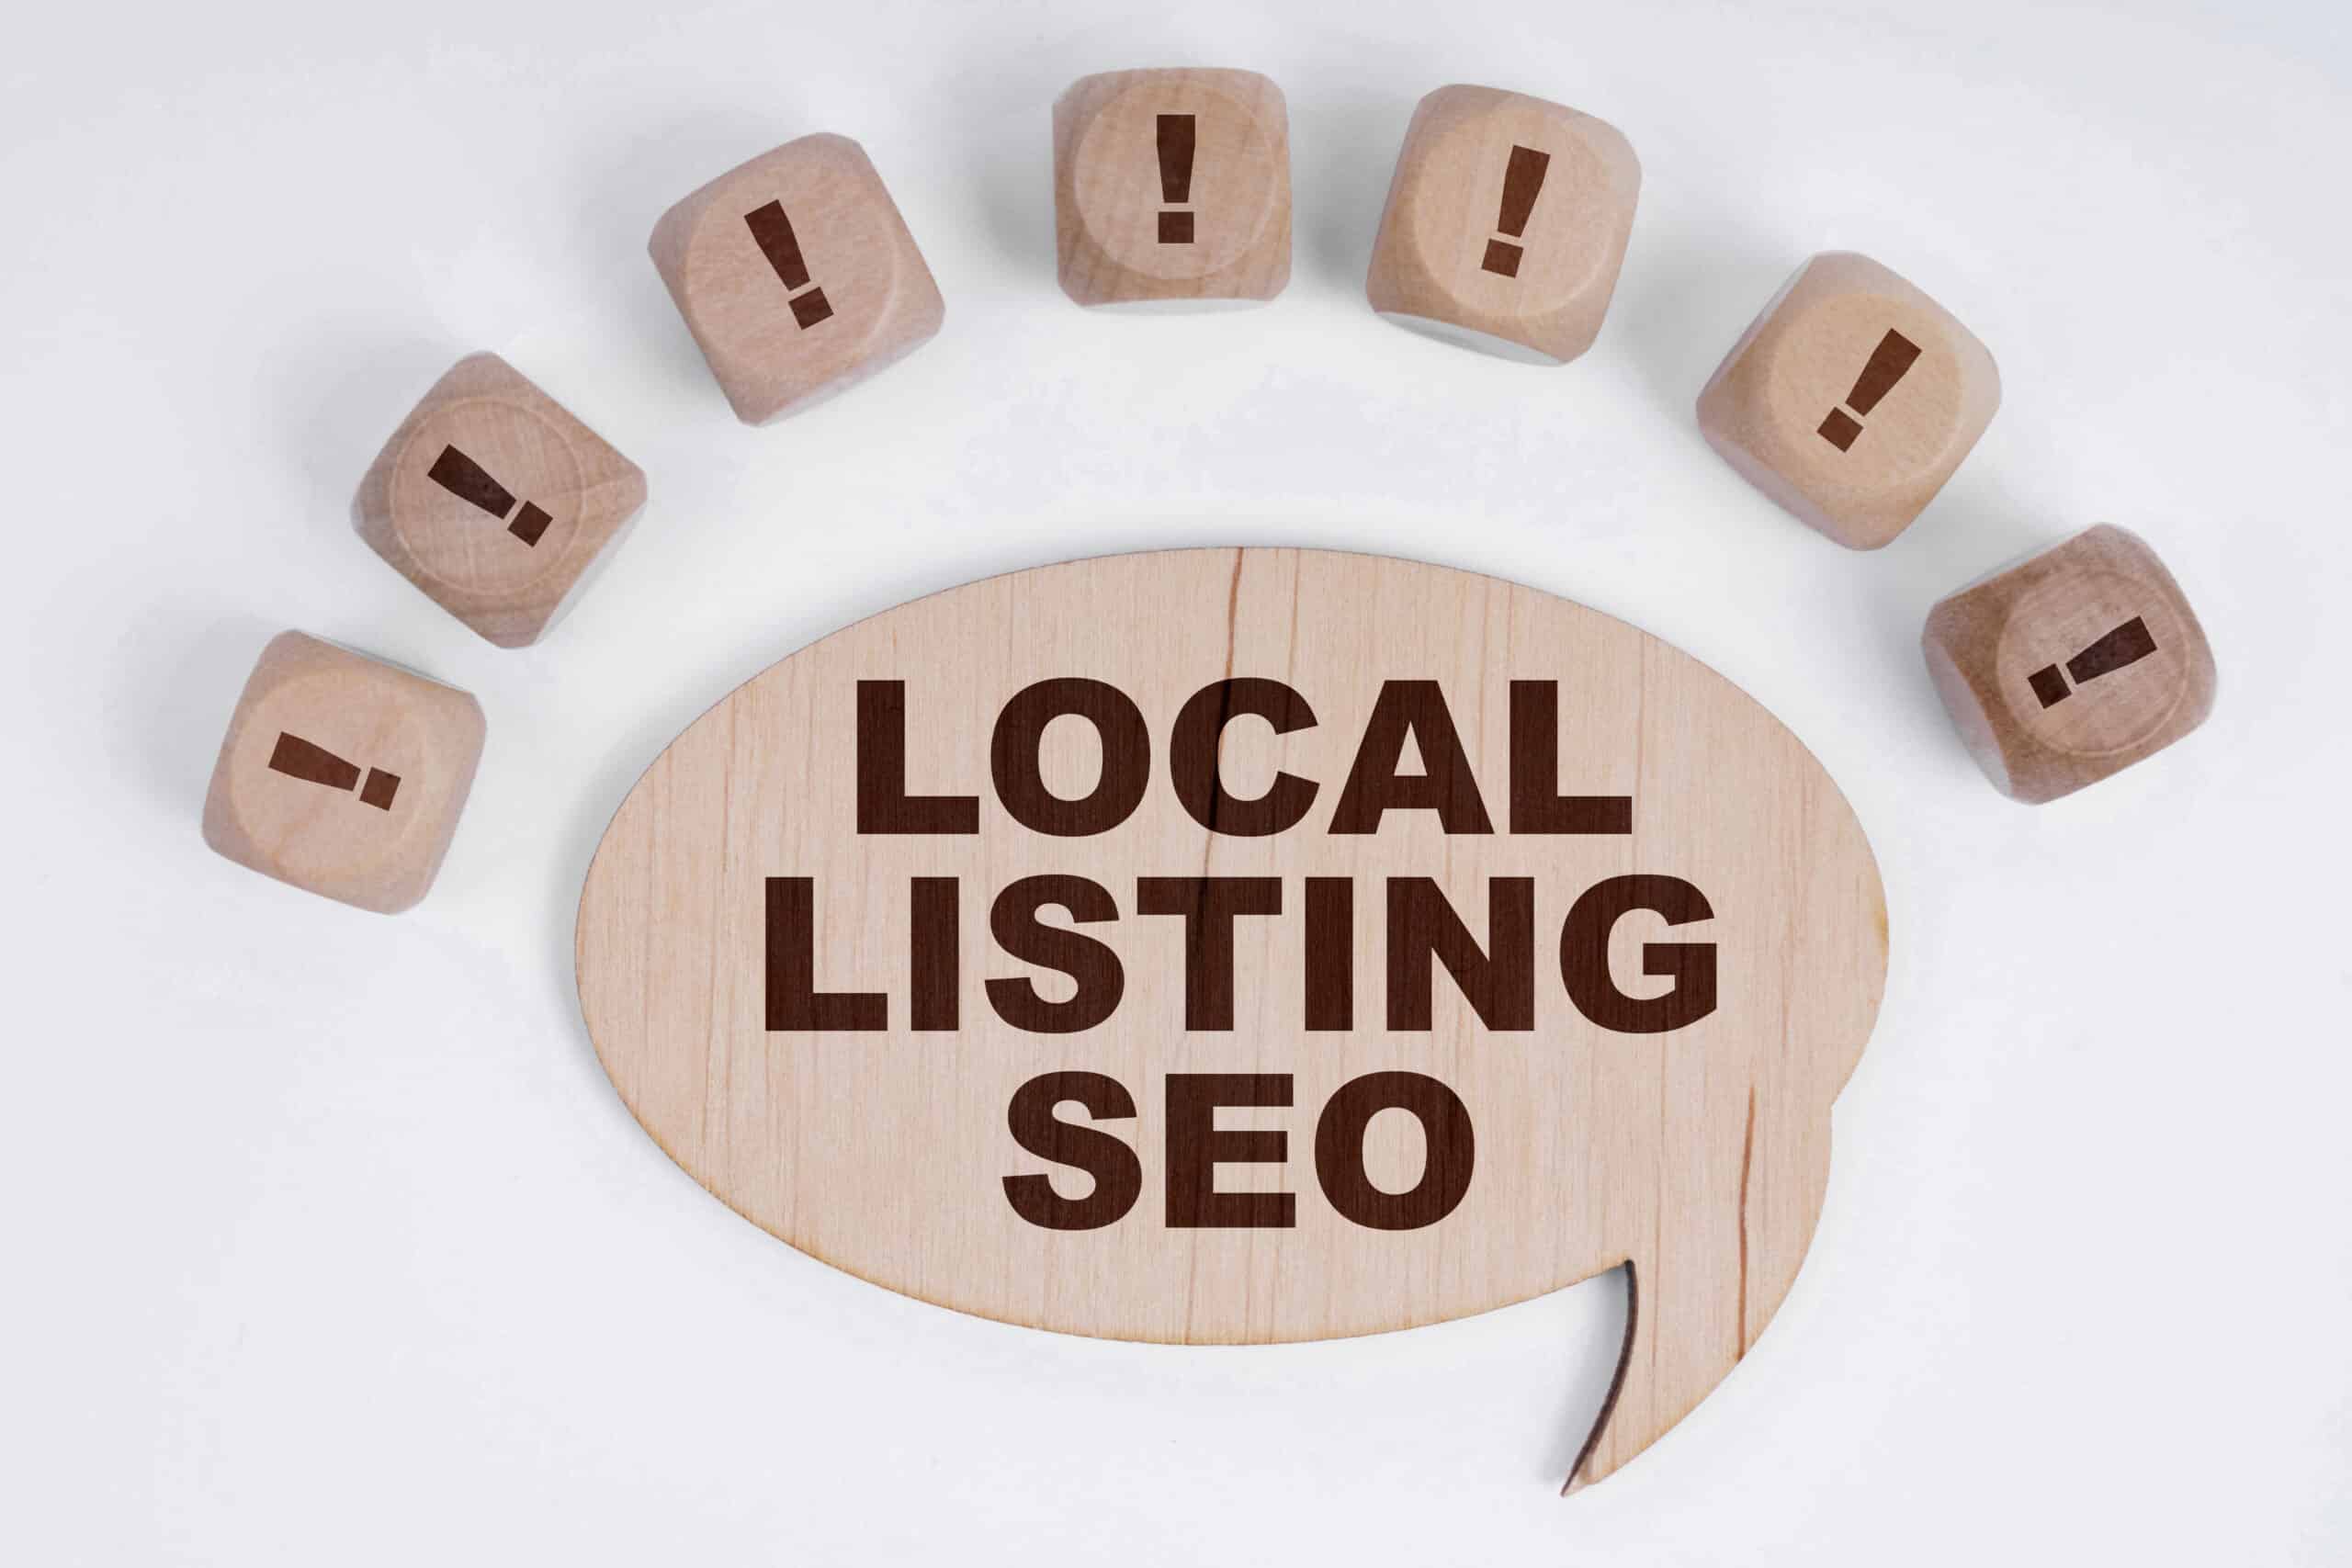 Advantages of Local Business Listings